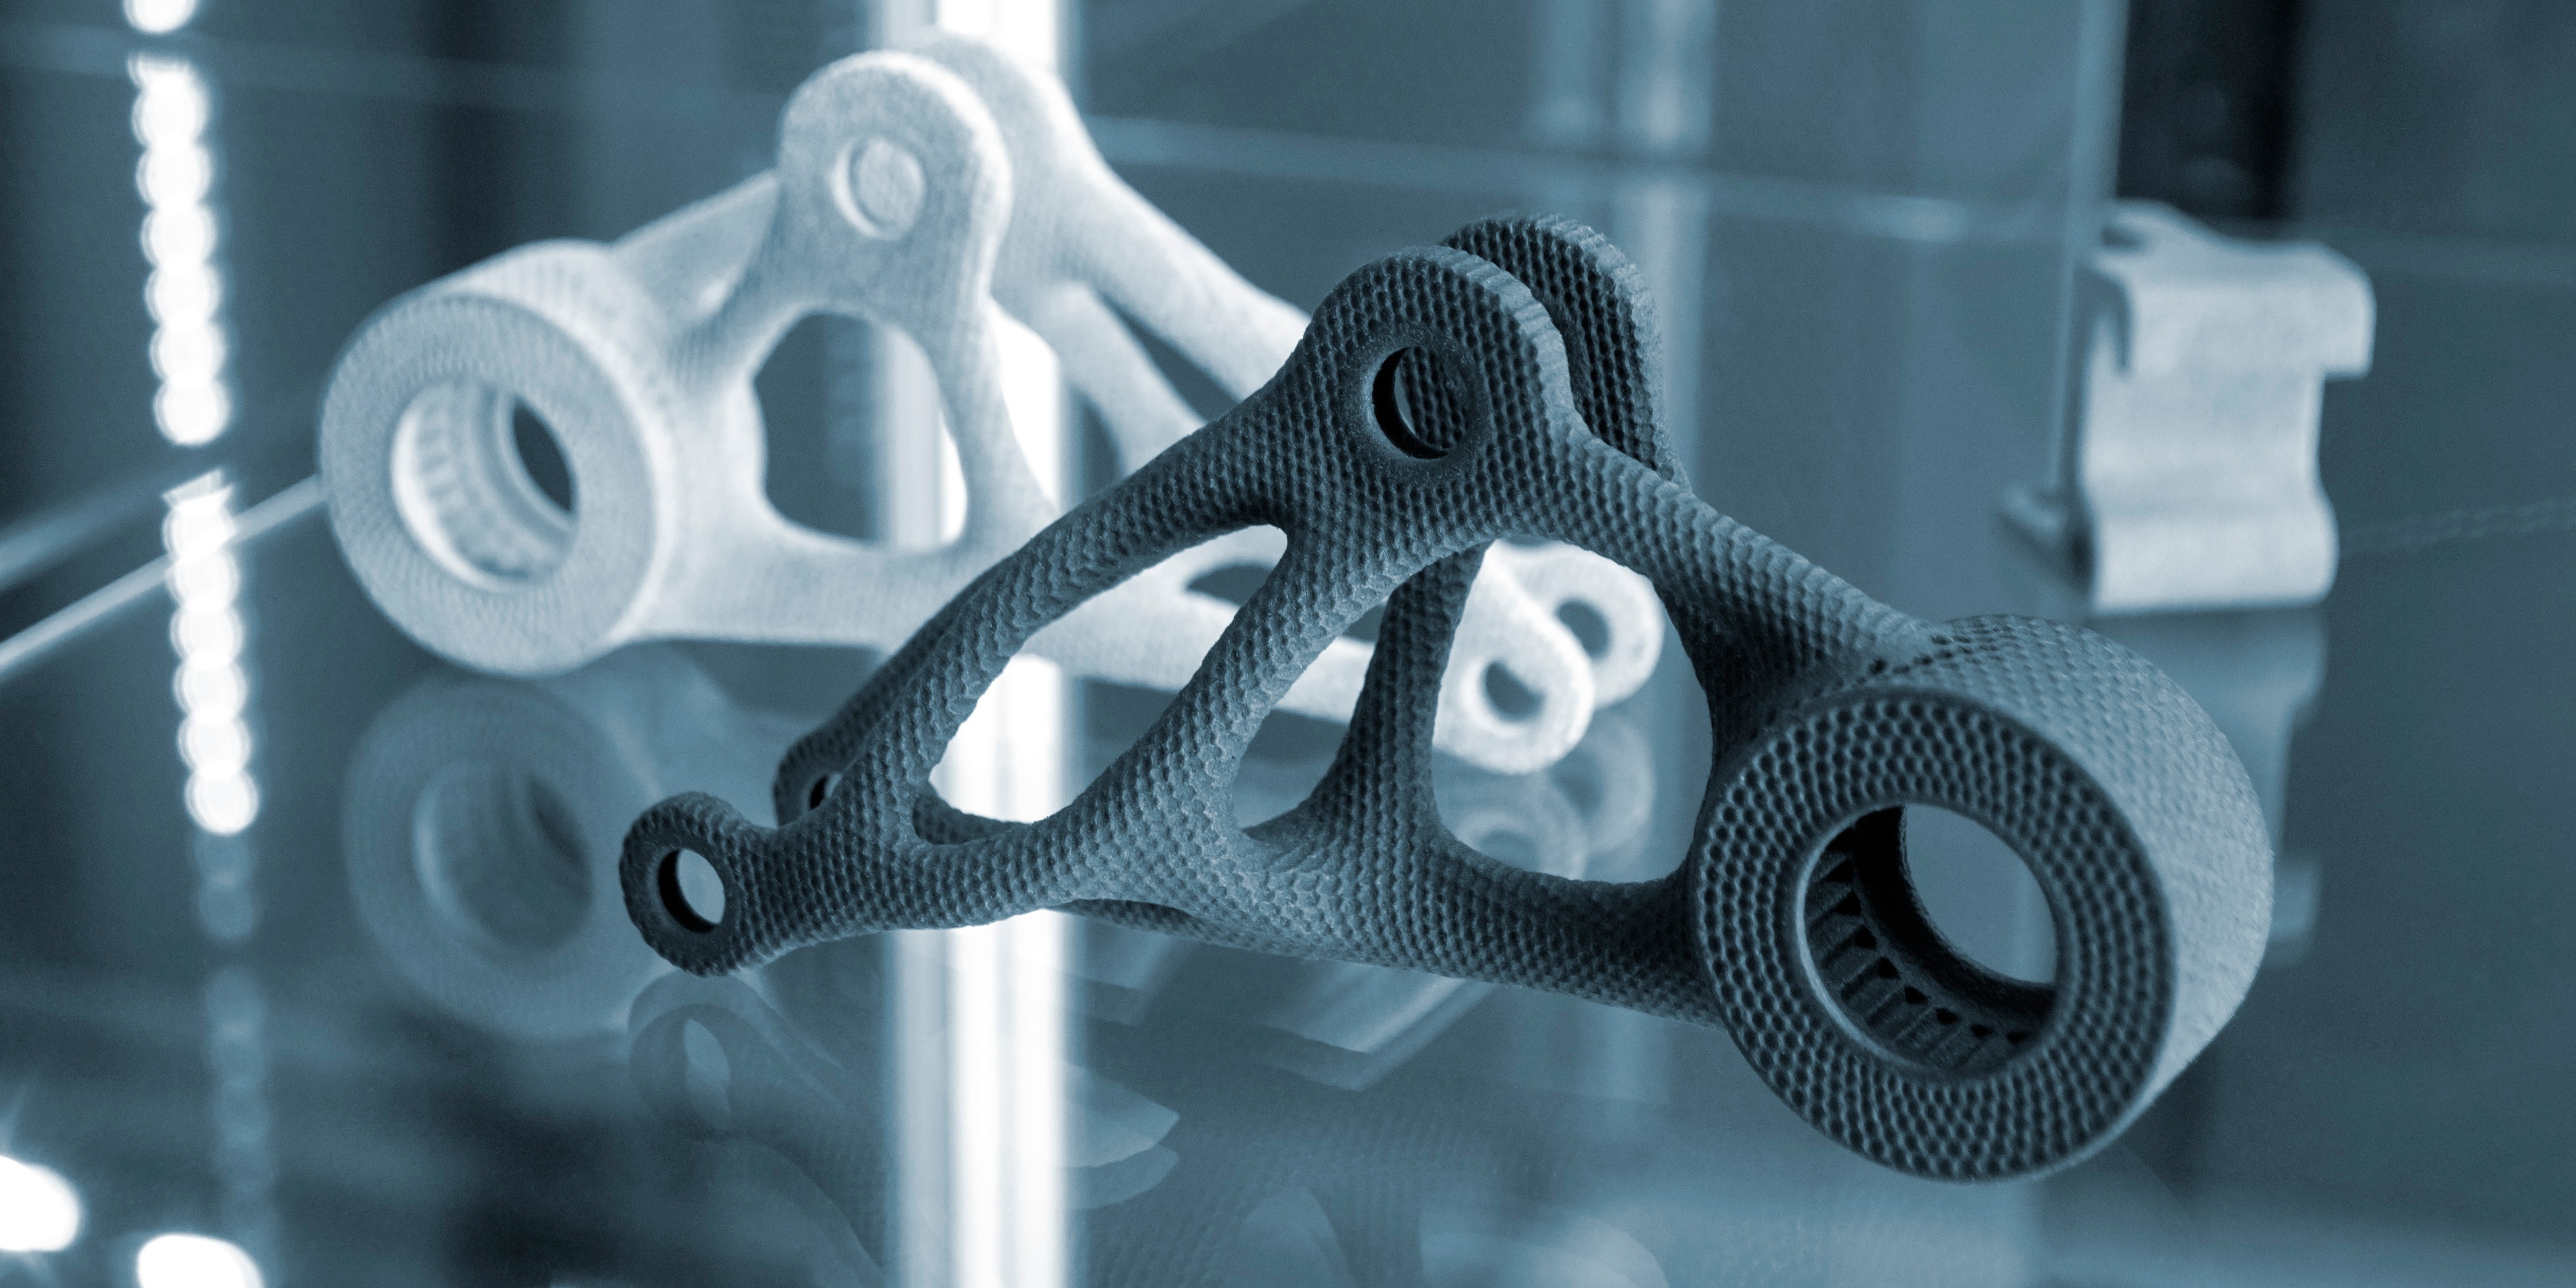 Which Unlocks More 3D Printing Applications? - DfAM or Business Model Innovation